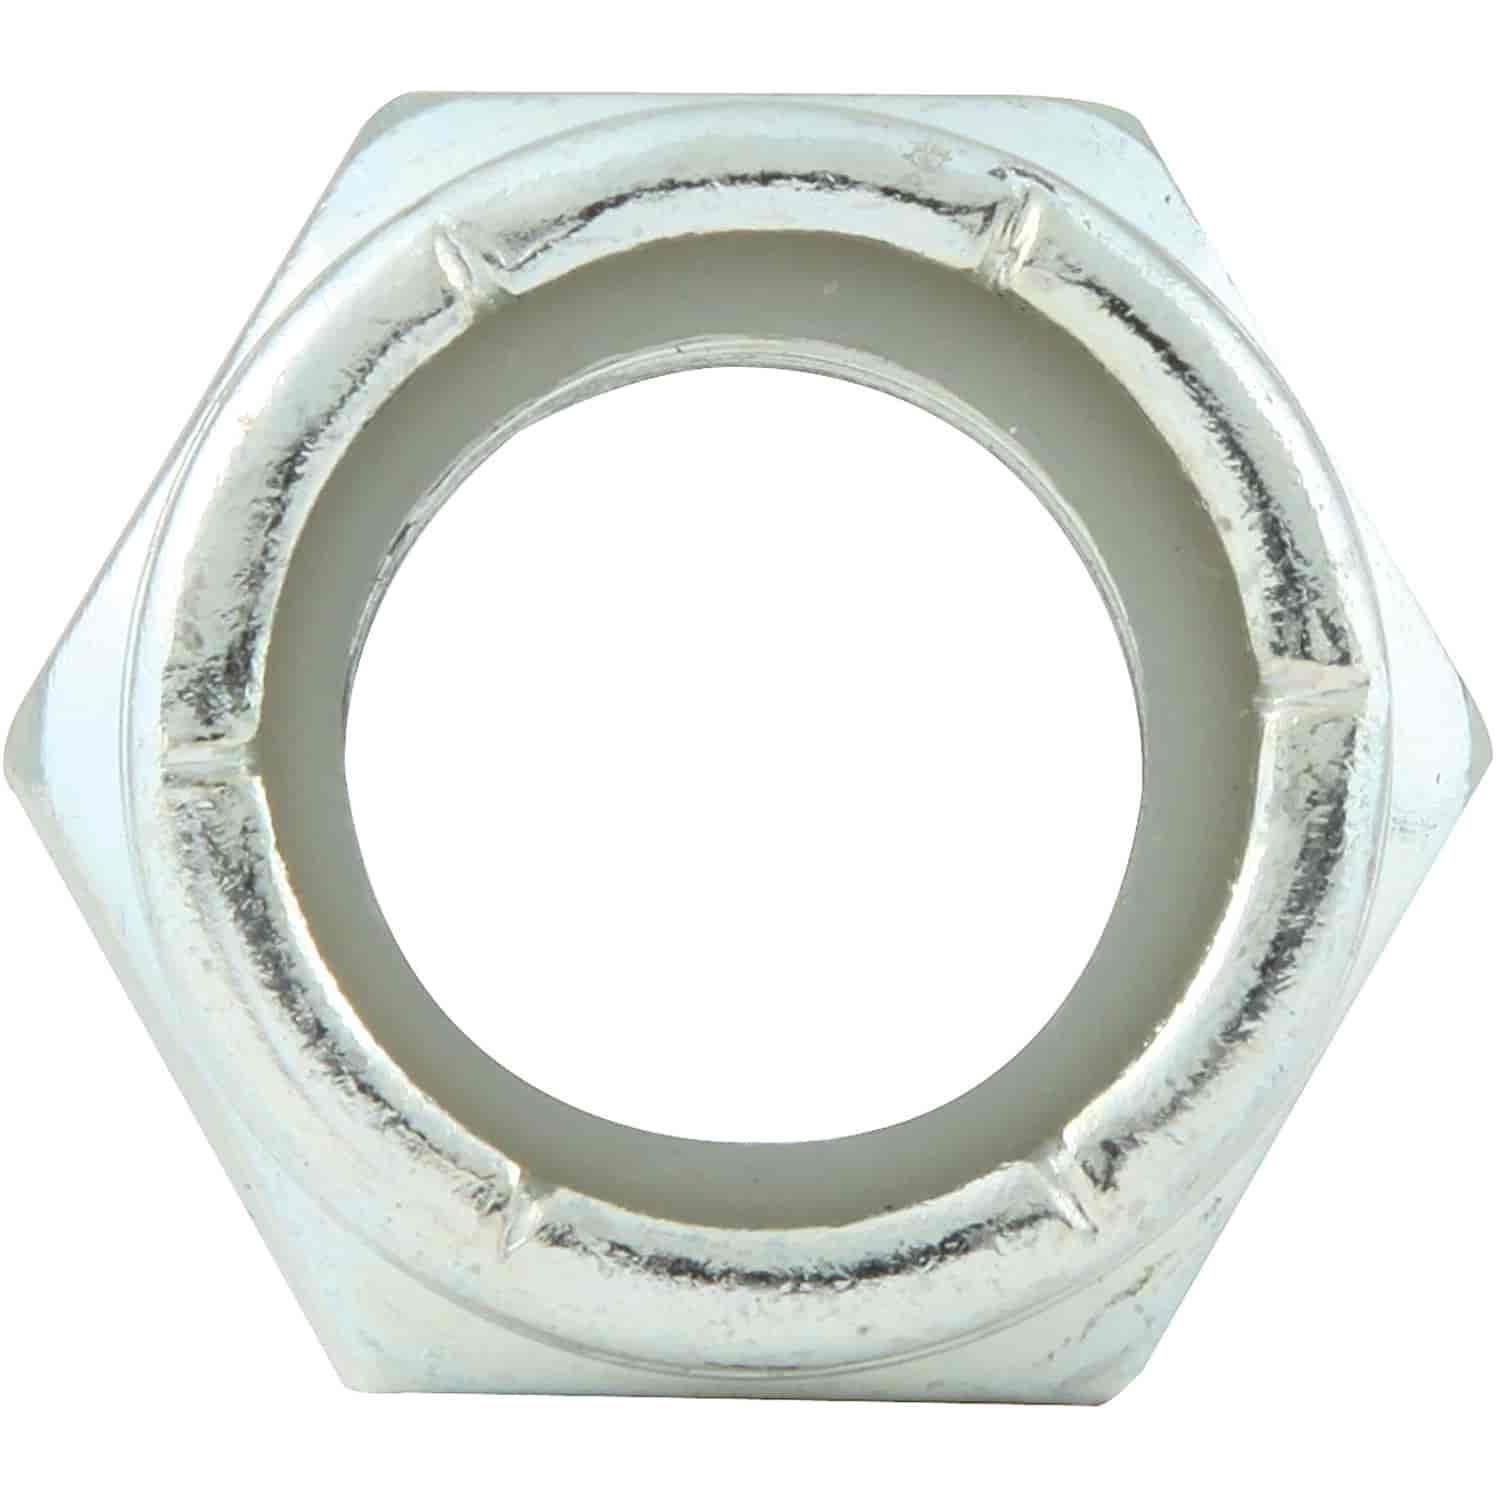 Coarse Thread Hex Nuts With Nylon Inserts 3/4"-10